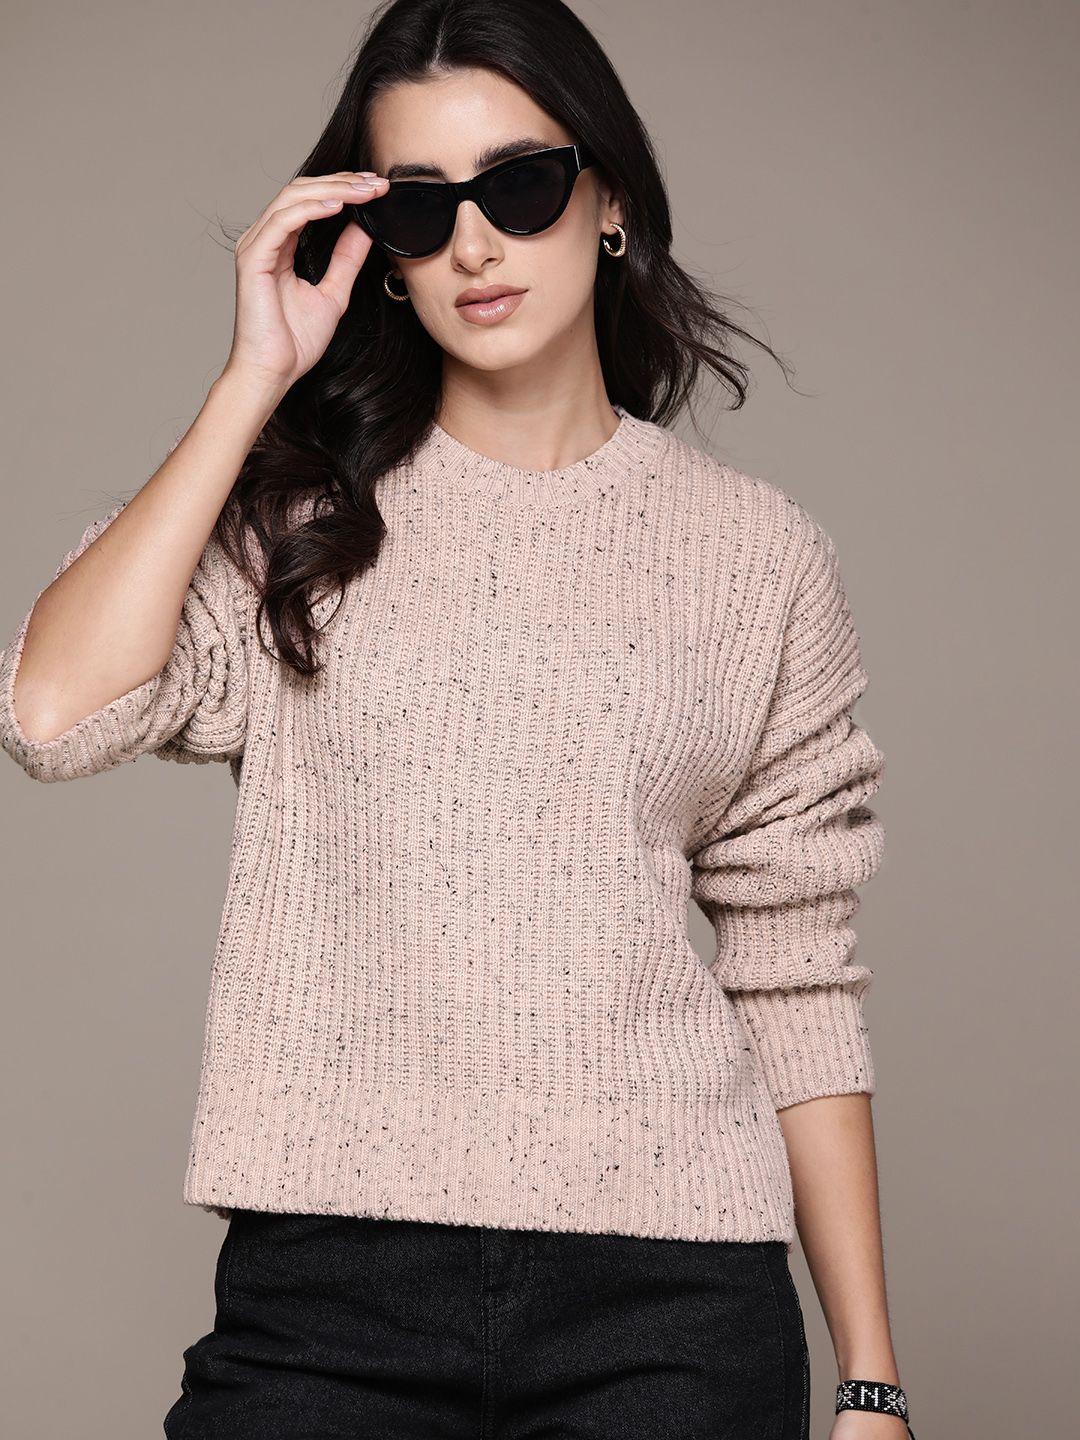 the roadster lifestyle co. acrylic ribbed speckled pullover